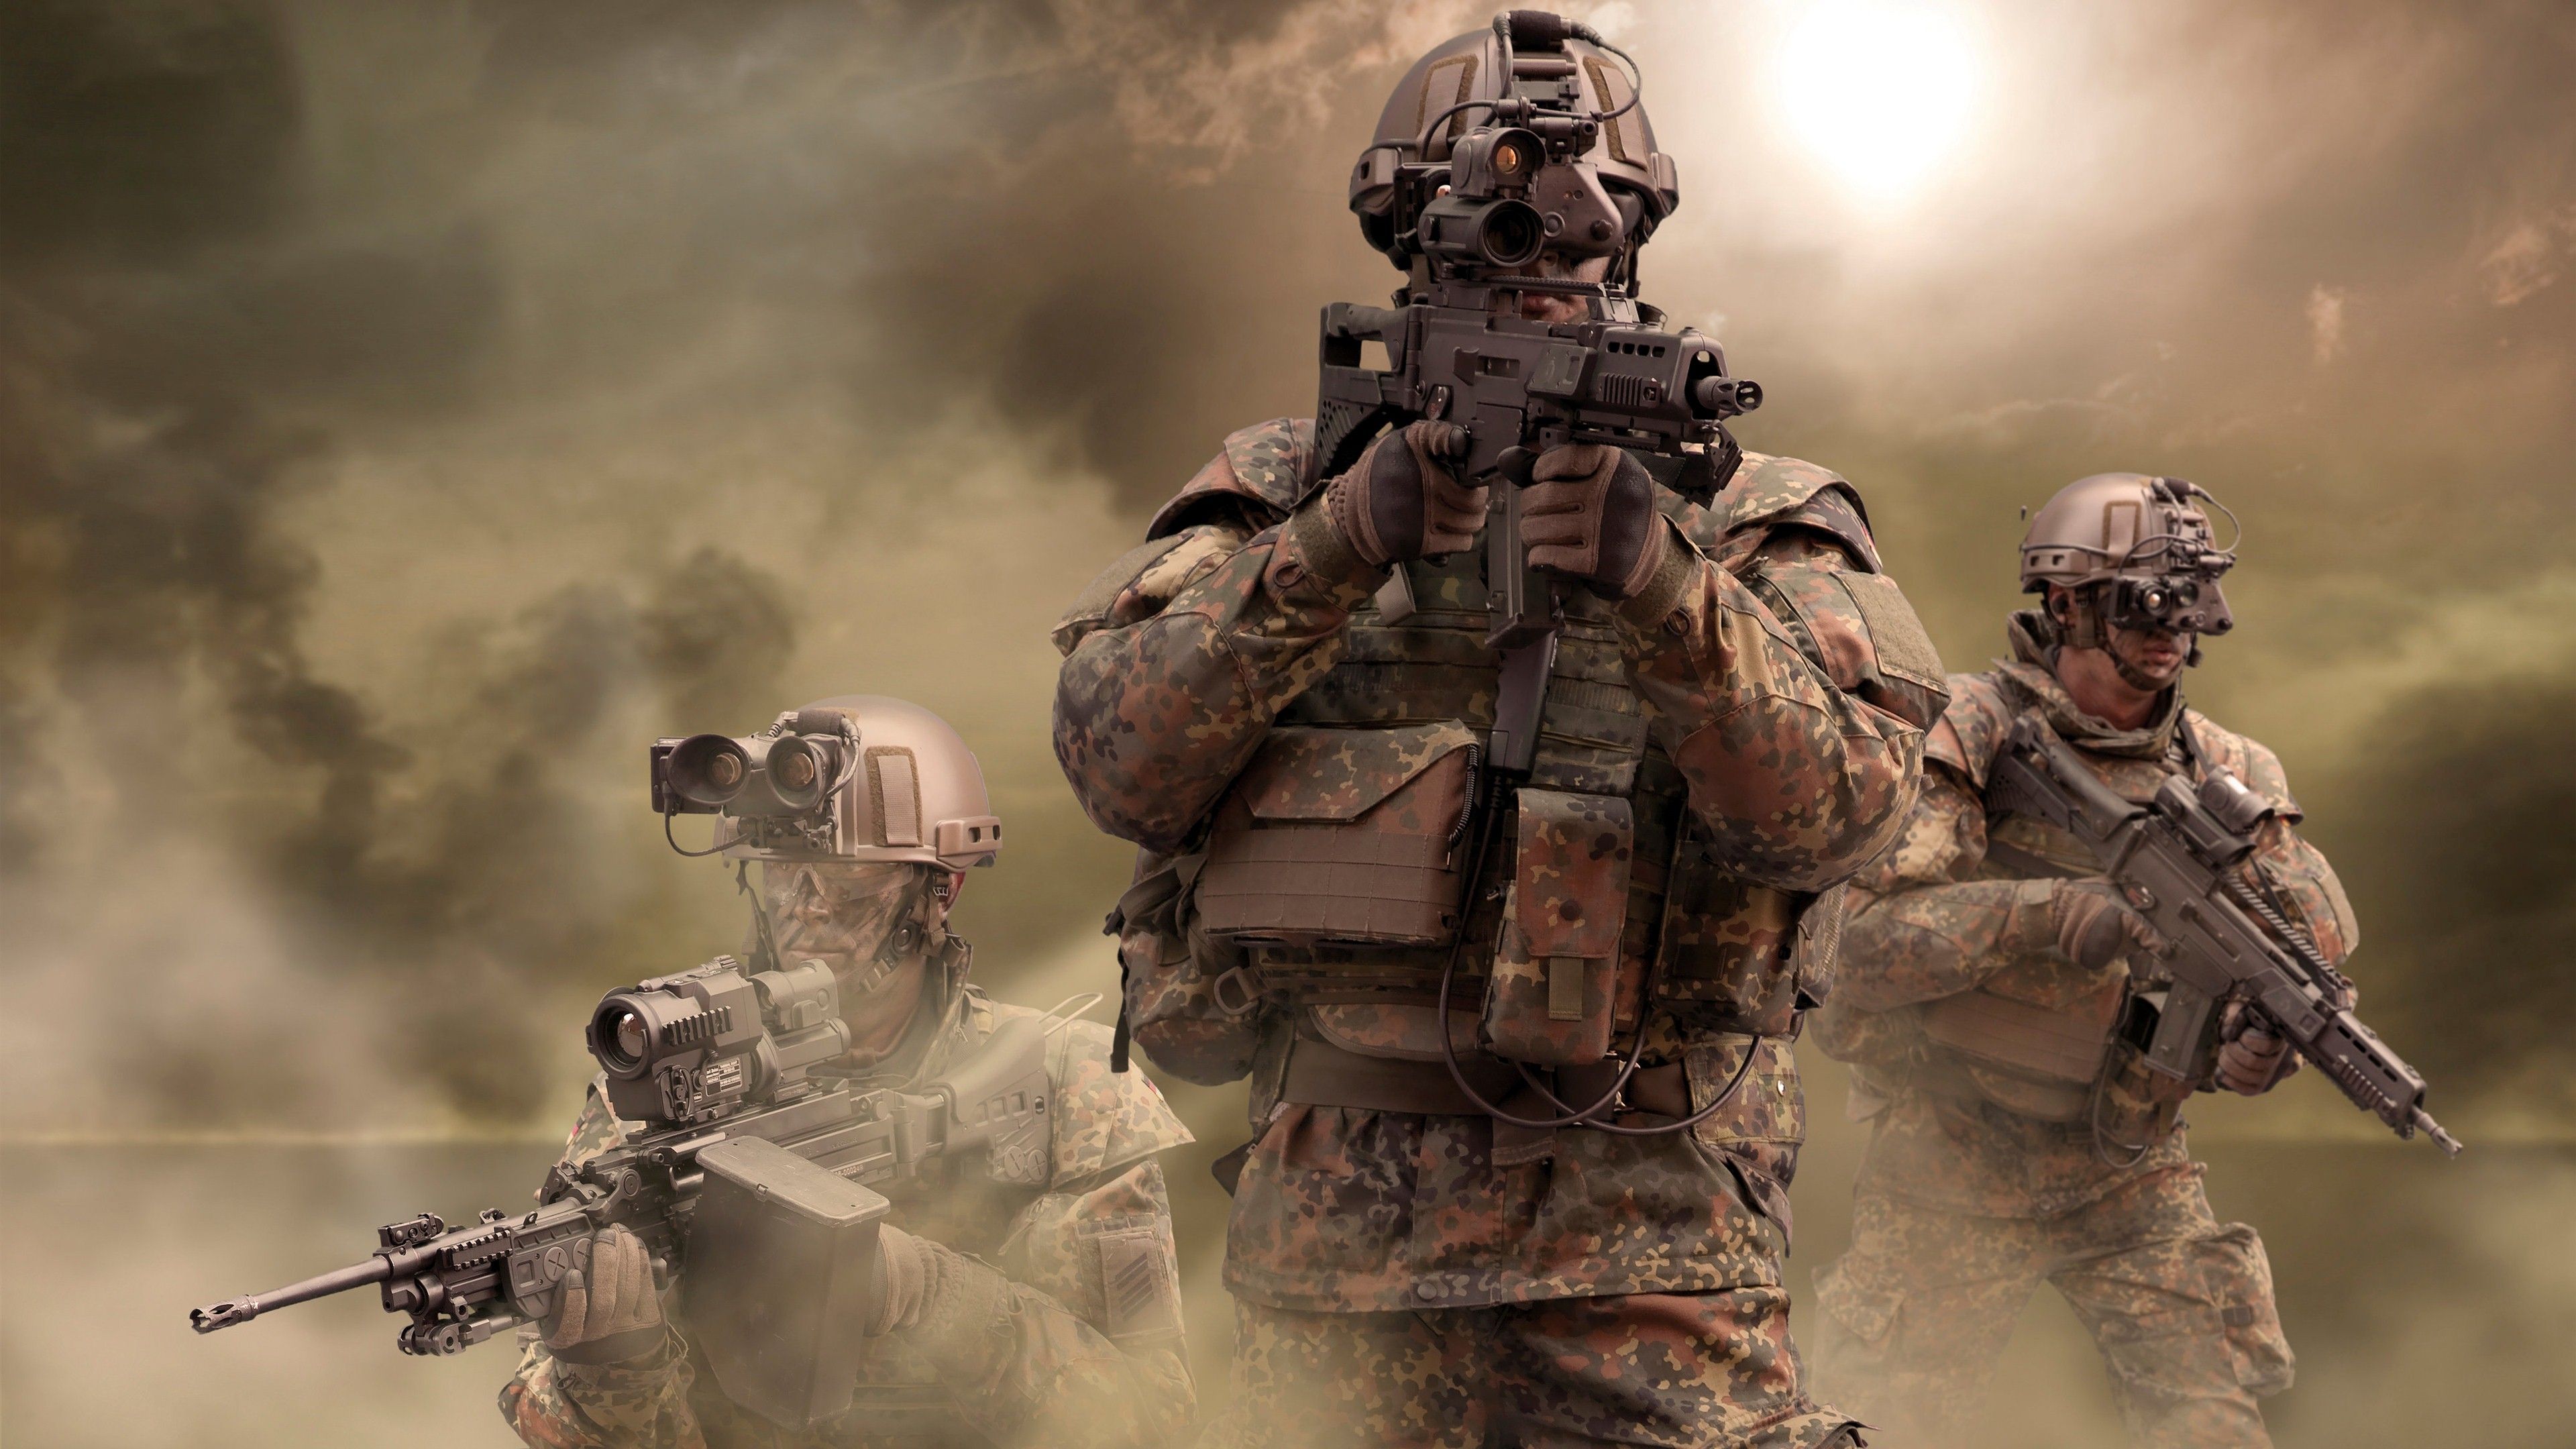 Hd army wallpapers and background images for download military wallpaper army wallpaper future soldier